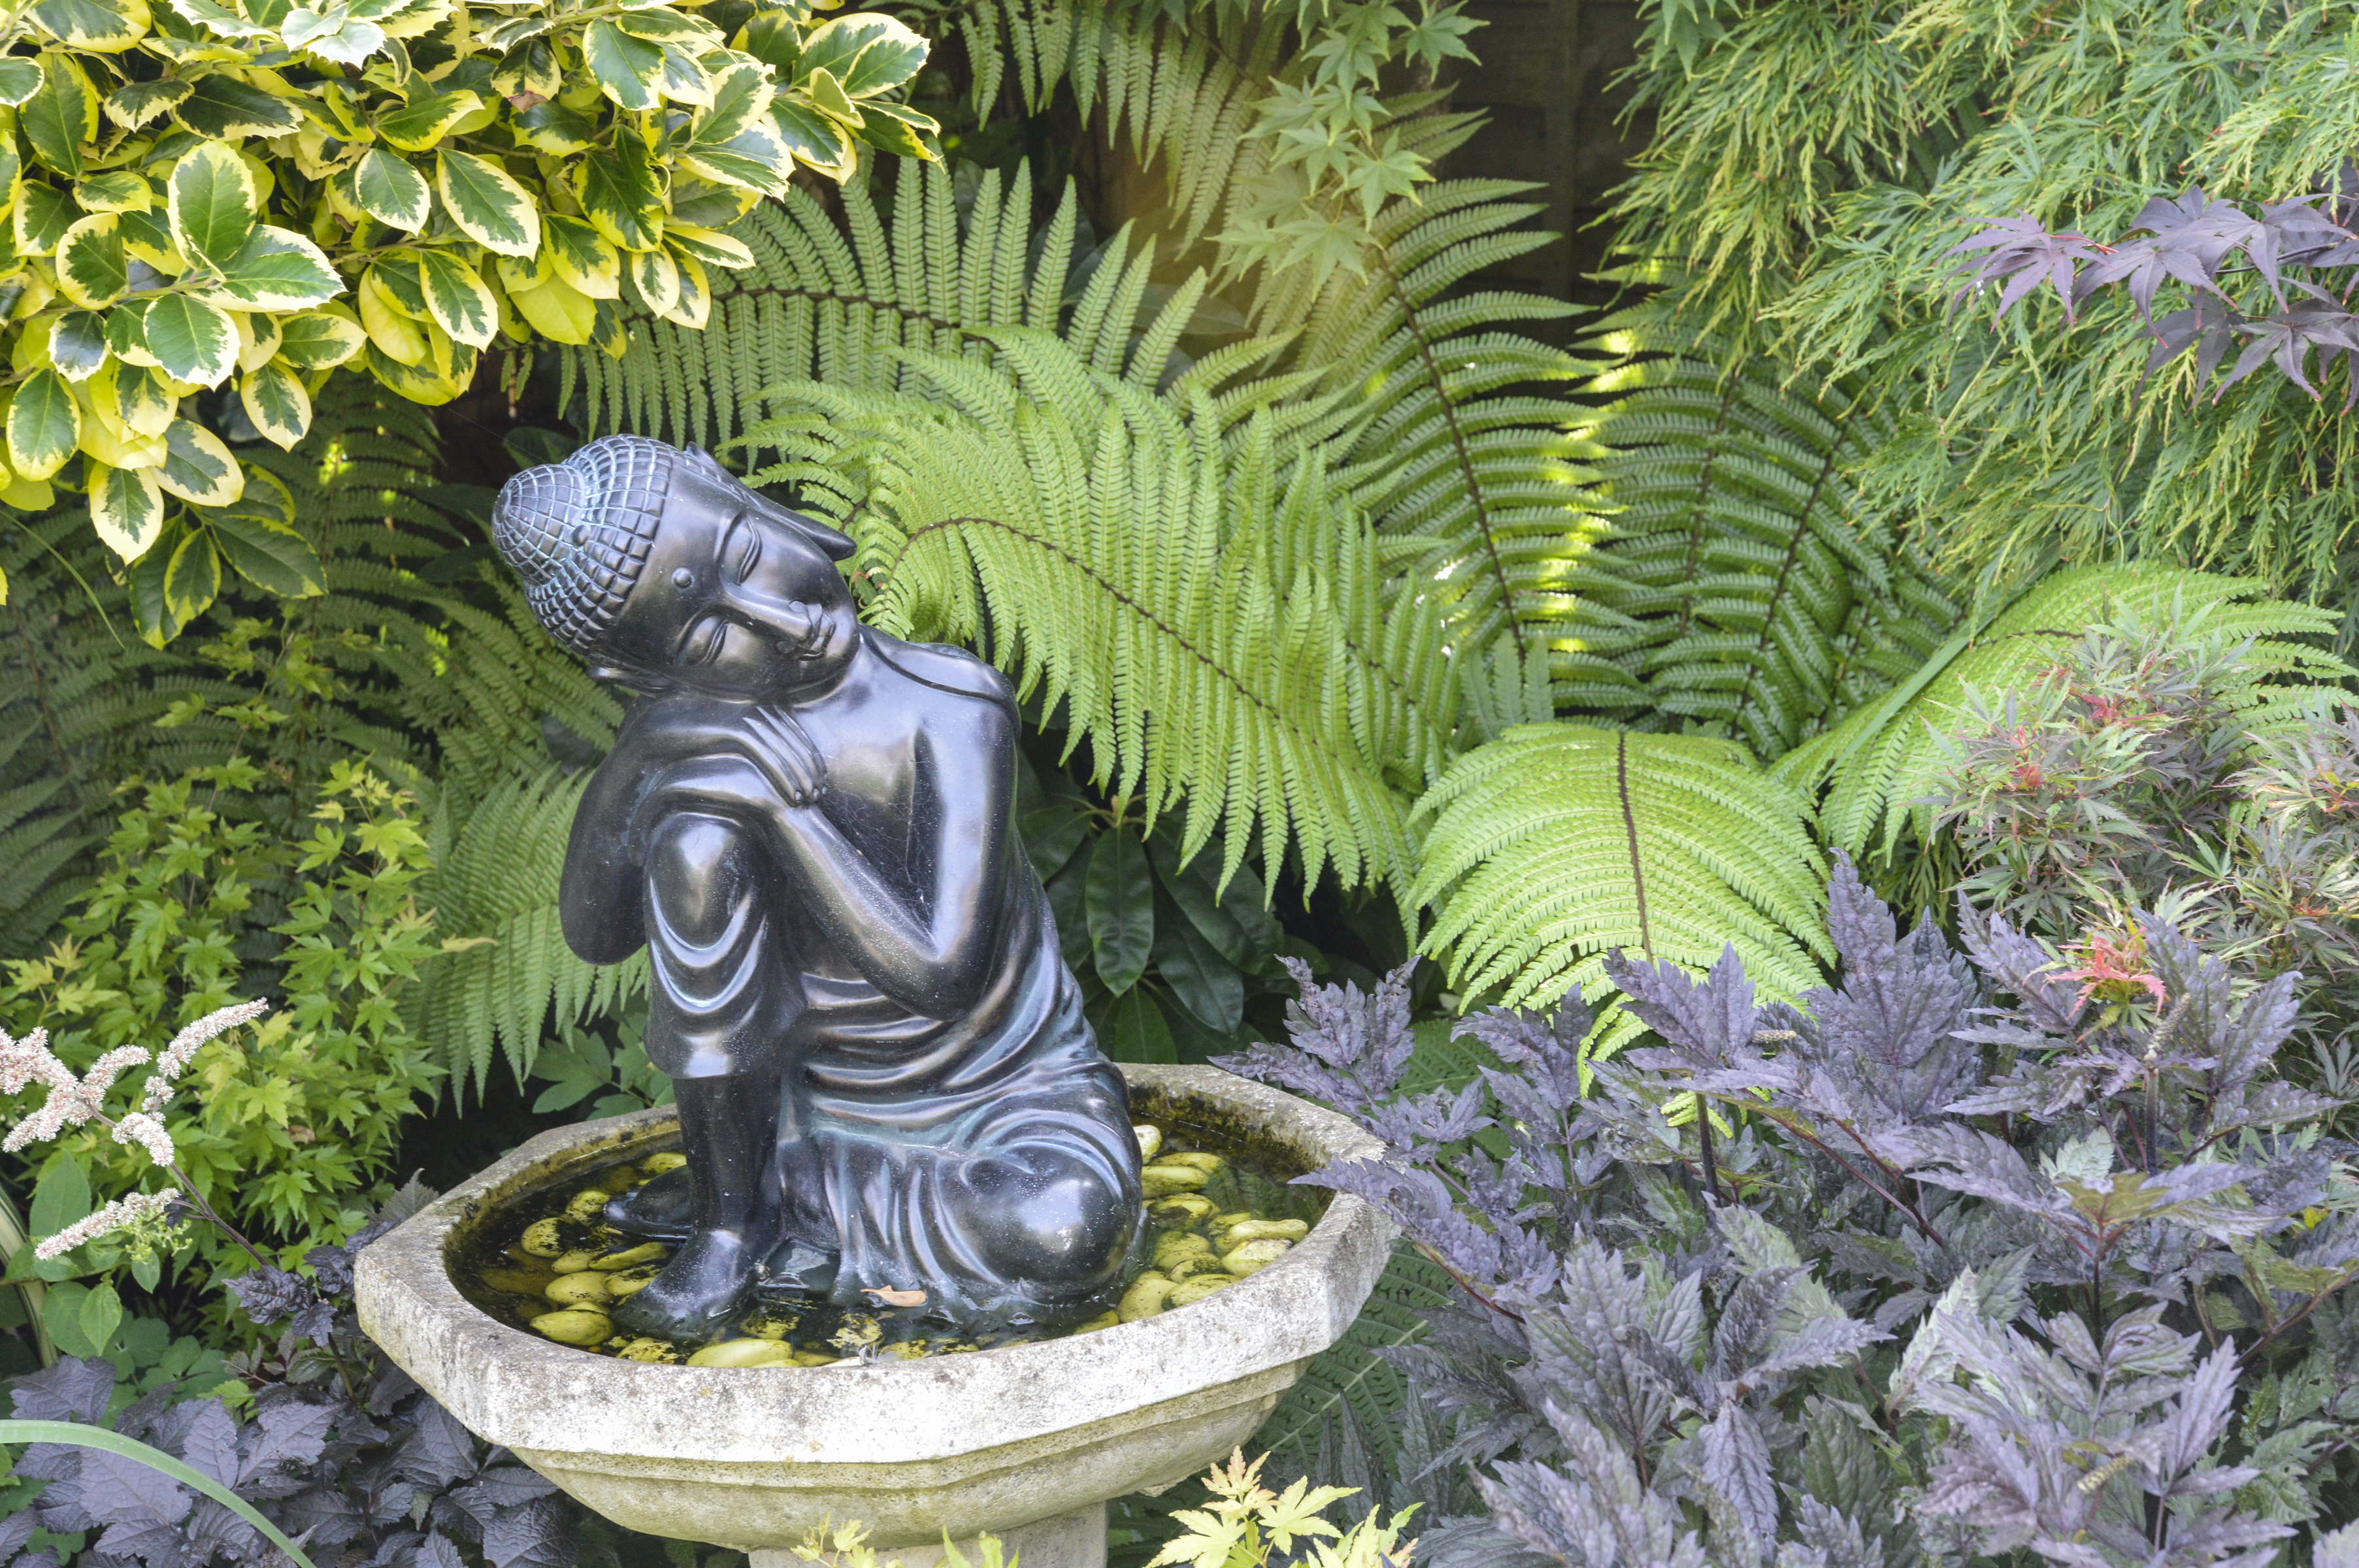 Buddha nestling into a fern at 24 Bede Crescent, Tyne & Wear (Susie White/PA)